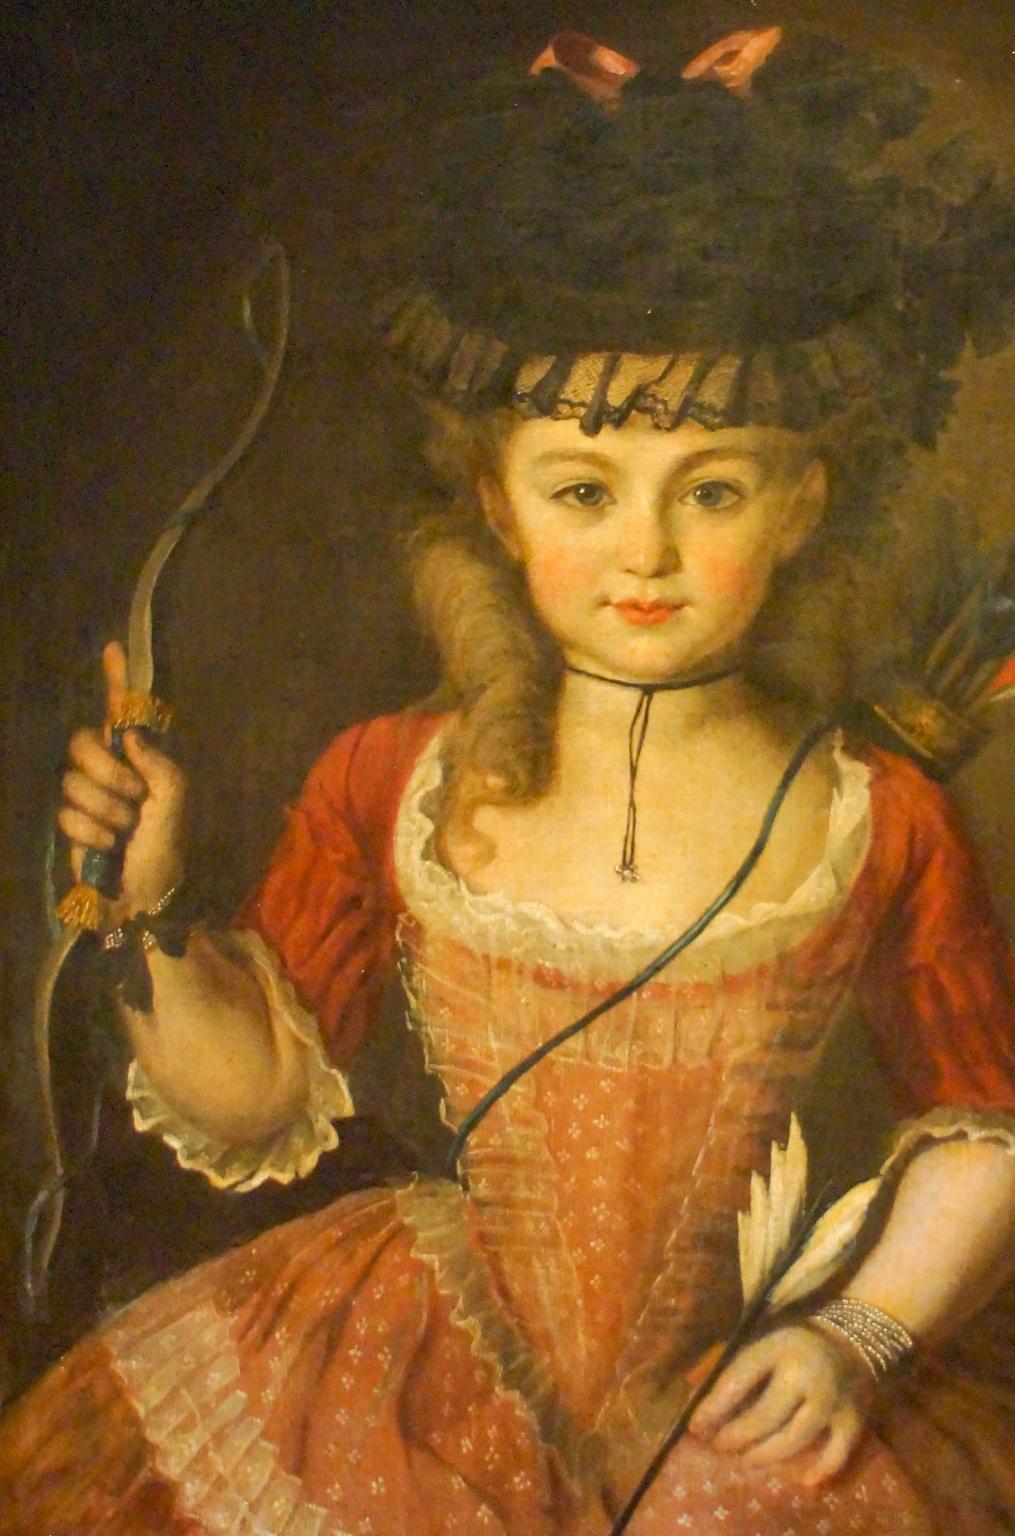 The girl is dressed as goddess Diana with bow and arrow. On the backside the painting is signed as 'Paint à Paris par Vermot, en 1775' (i.e. Painted in Paris by Vermot in 1775)

Oil on canvas, measures: 62x 73 cm (24.4 x 28.7 inches)

Frame